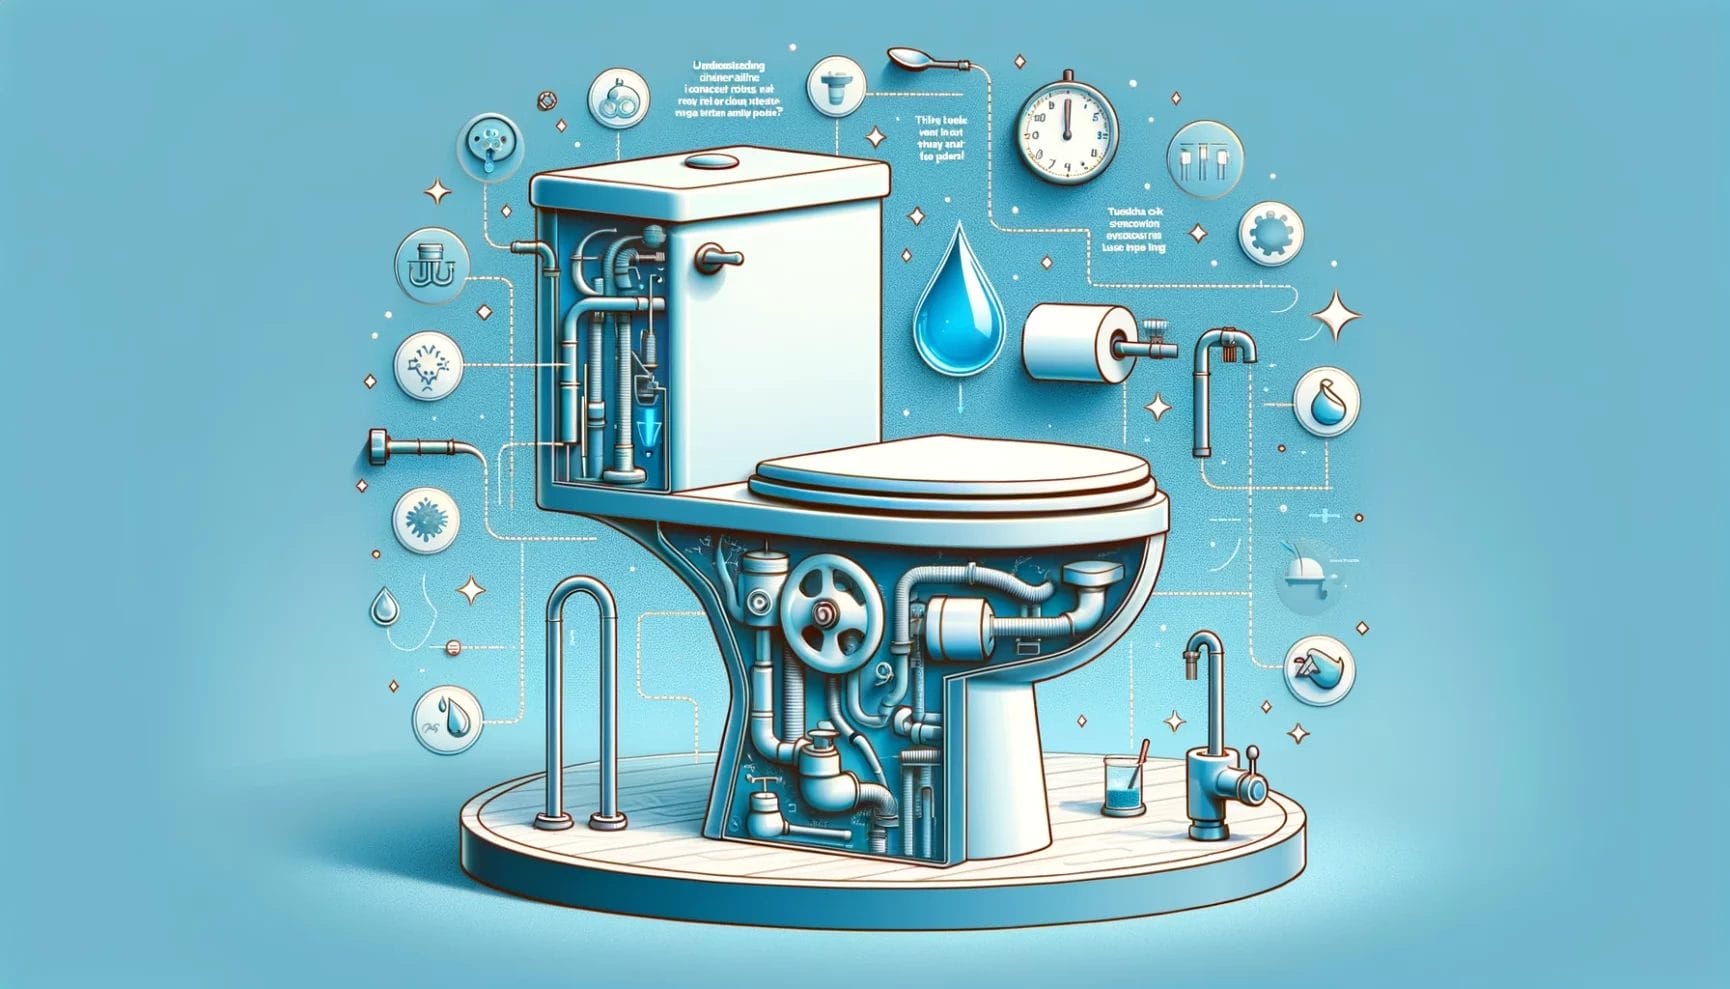 Exploded view illustration of a toilet's plumbing system with floating components and water-related icons on a blue background.